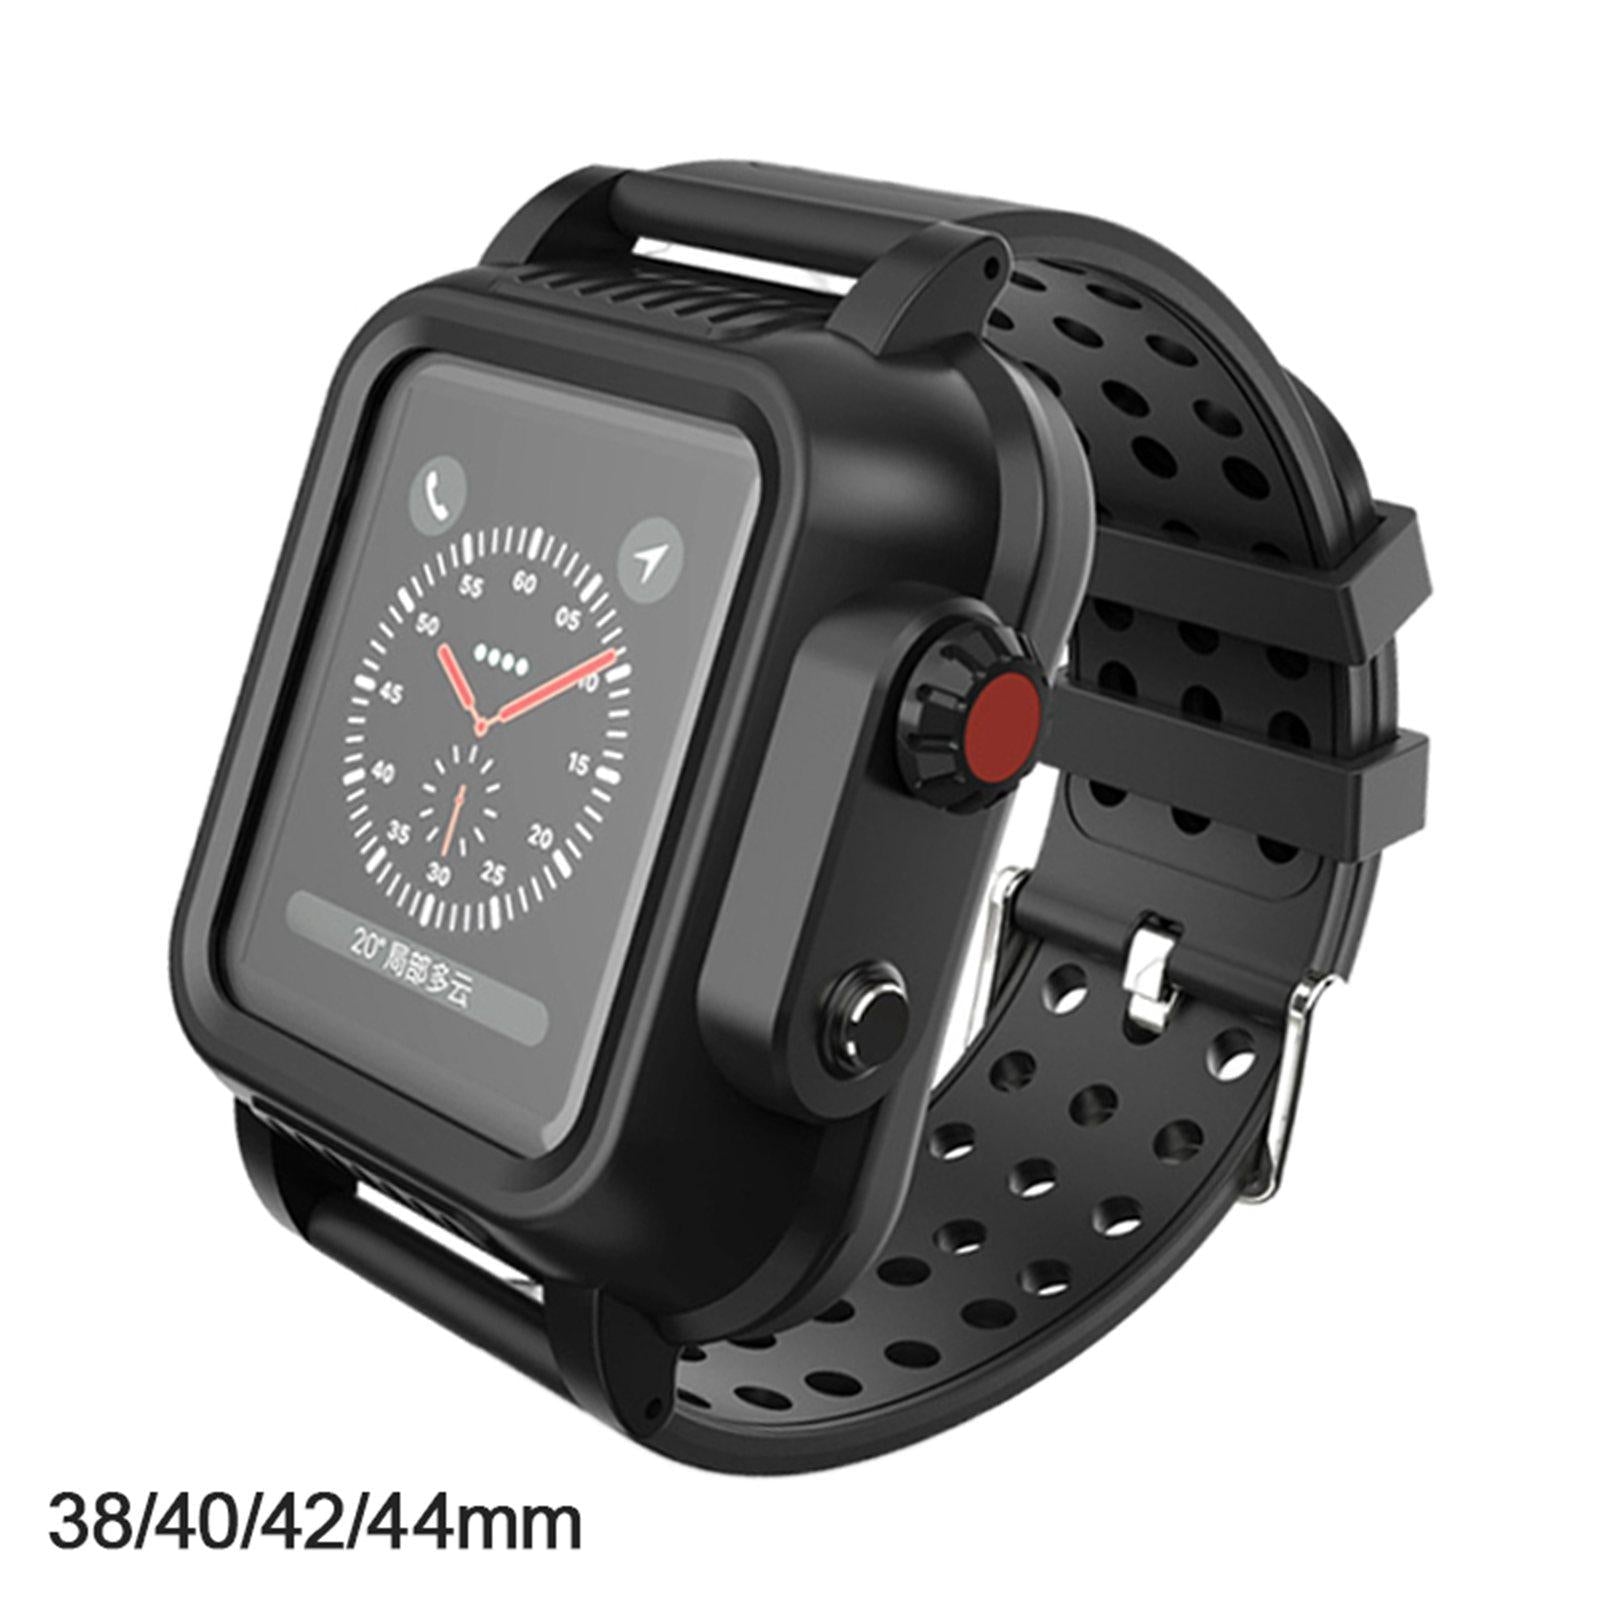 Rugged Protective Case Shockproof Durable for Apple Watch 3rd 4th Generation strap width 38mm